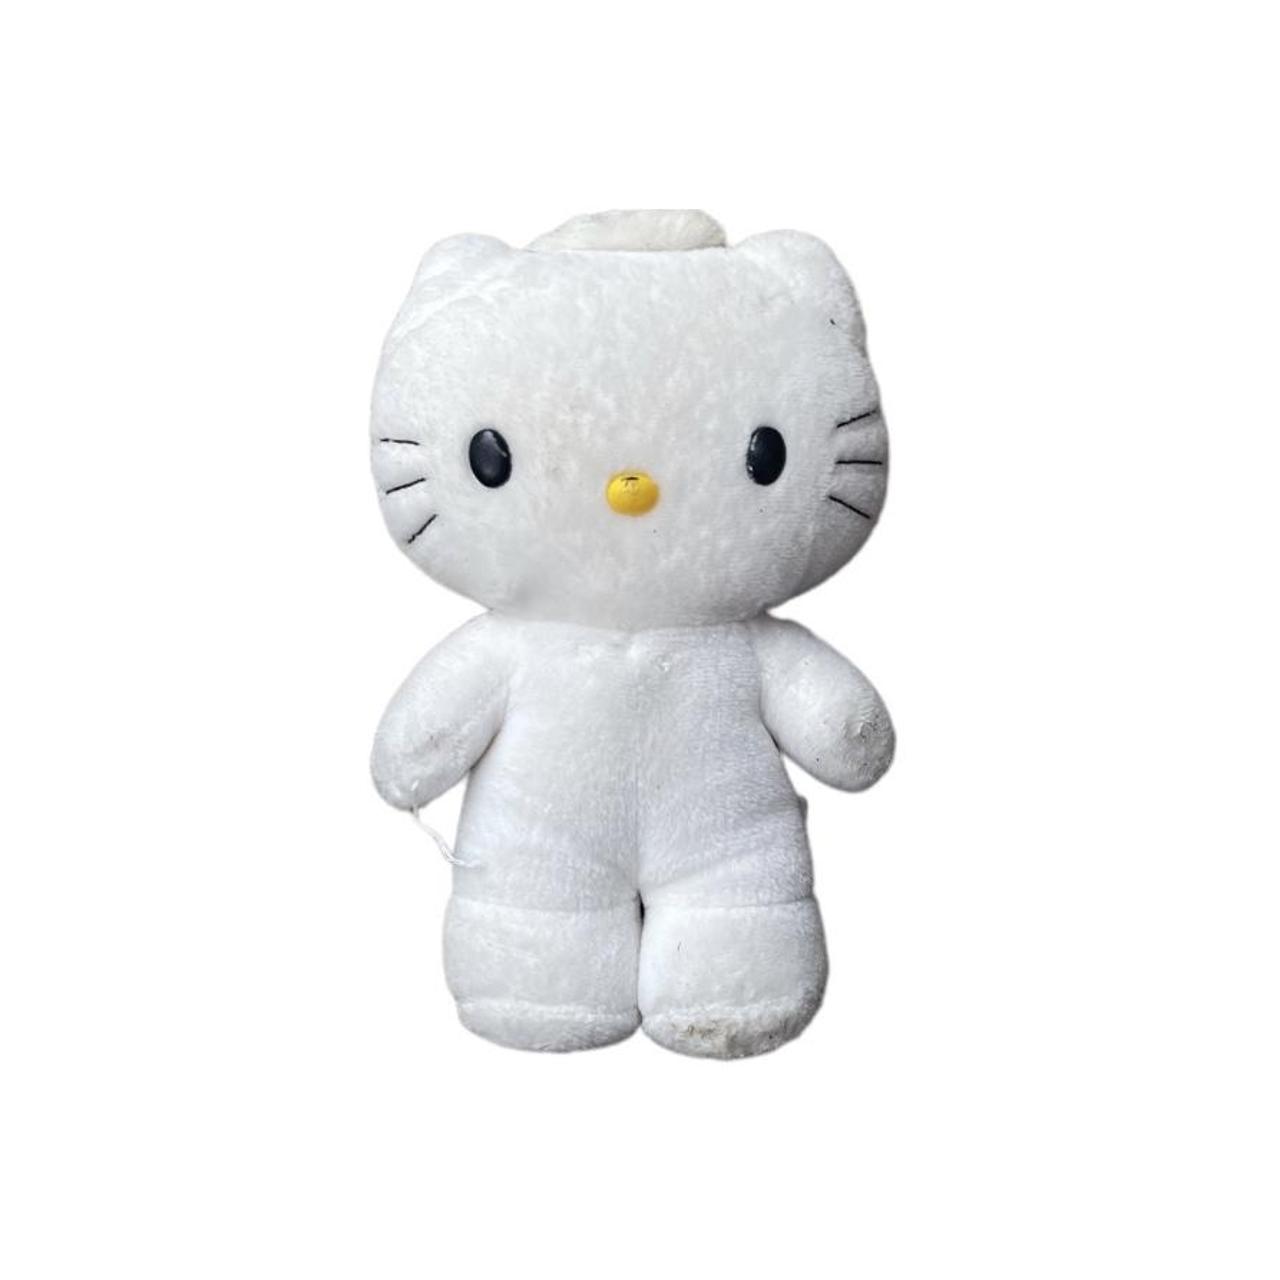 Product Image 1 - Vintage 1999 Hello Kitty Plush
All